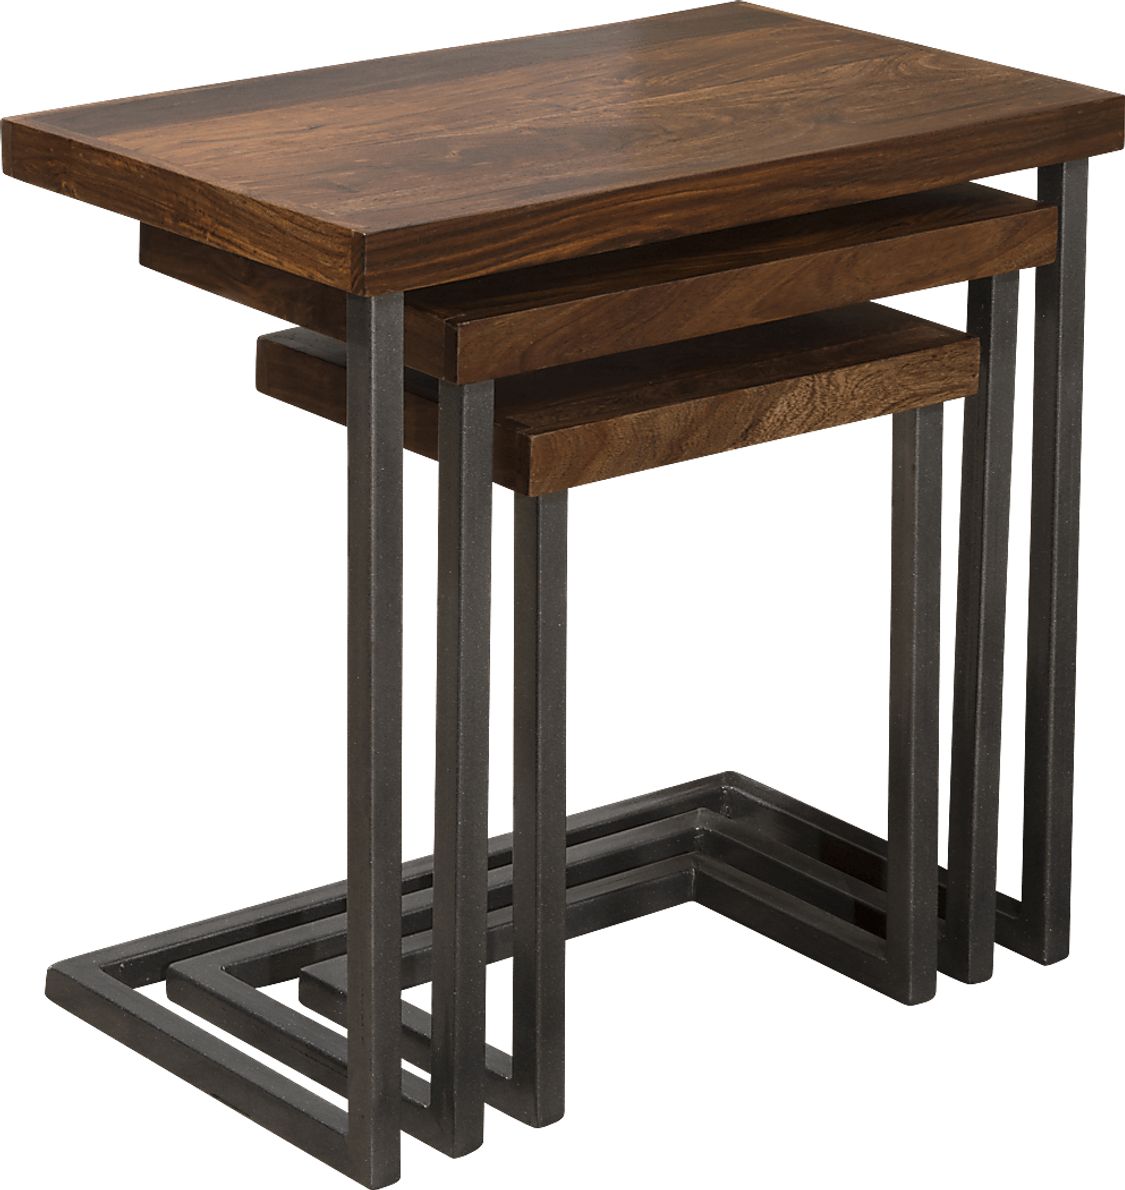 Aviemore Brown Nesting Tables, Set of 3